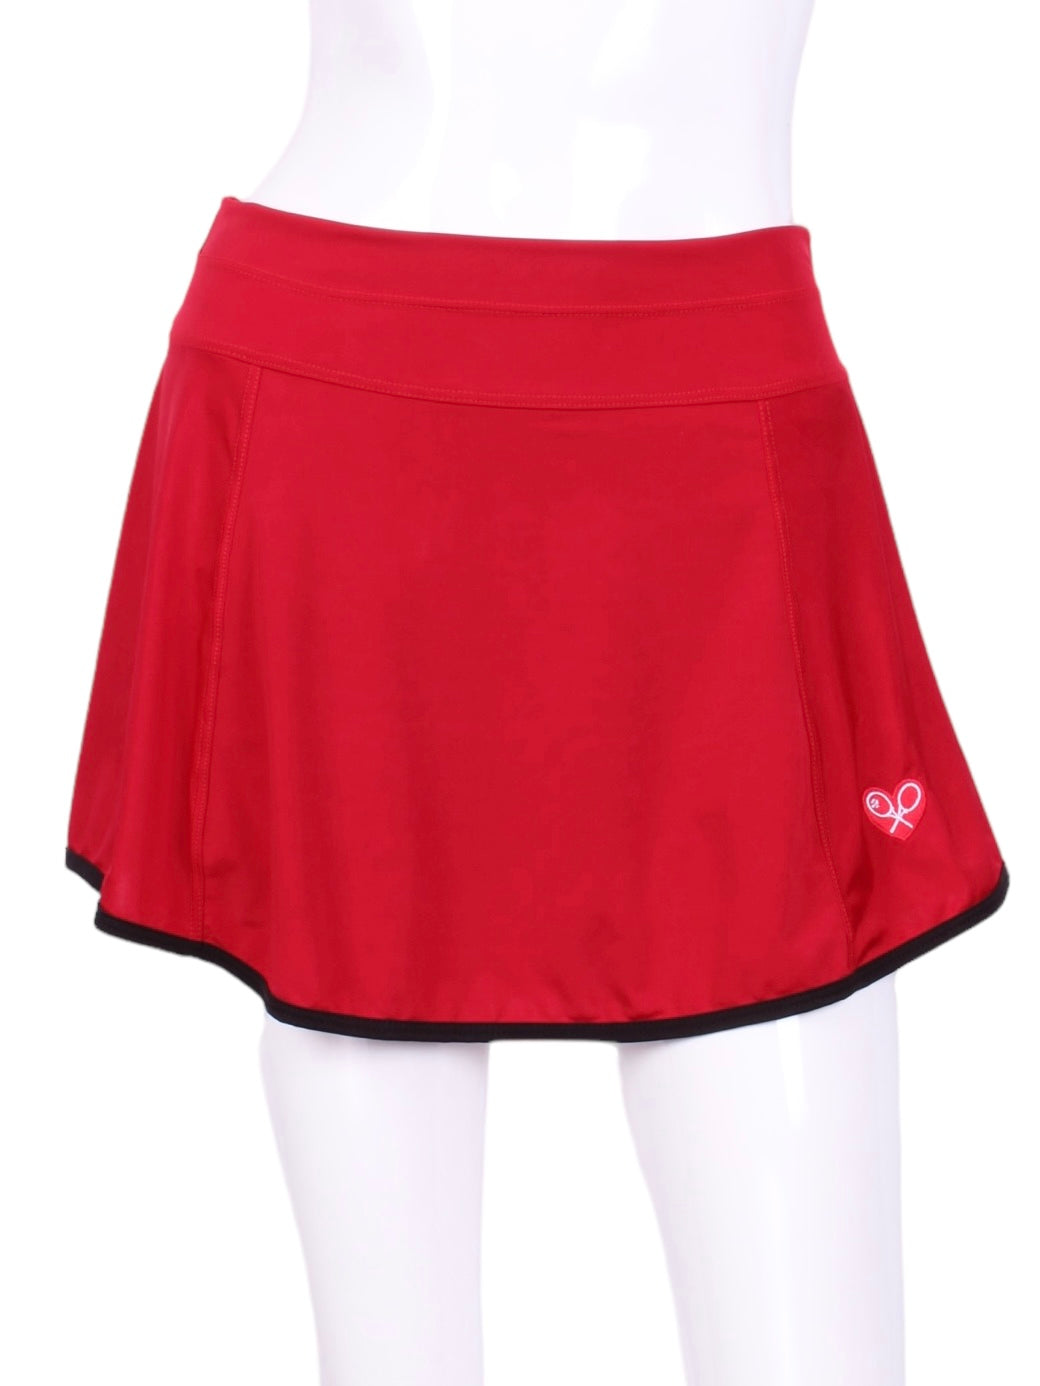 The limited edition Gladiator Skirt Dark Red is a remarkable piece of sportswear that combines both style and functionality in the realm of tennis fashion. This tennis skirt is crafted with meticulous attention to detail, using the finest quality materials to provide an unparalleled experience for players on and off the court.